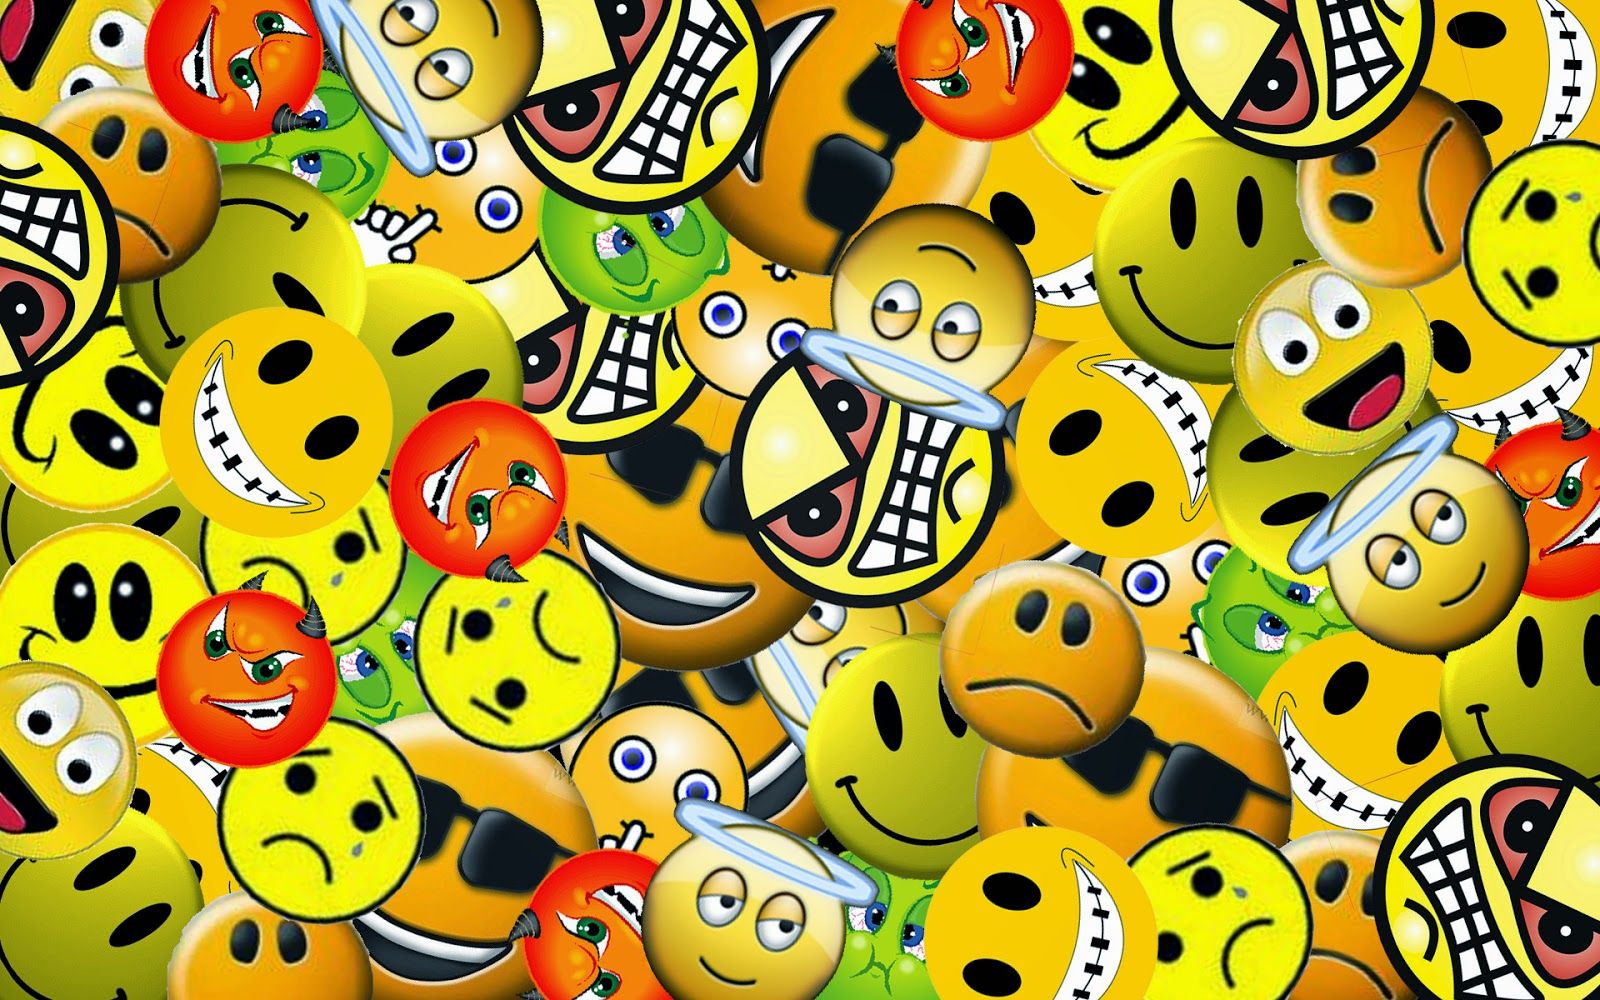 Smiley face background hd wallpaper for mobile Facebook free